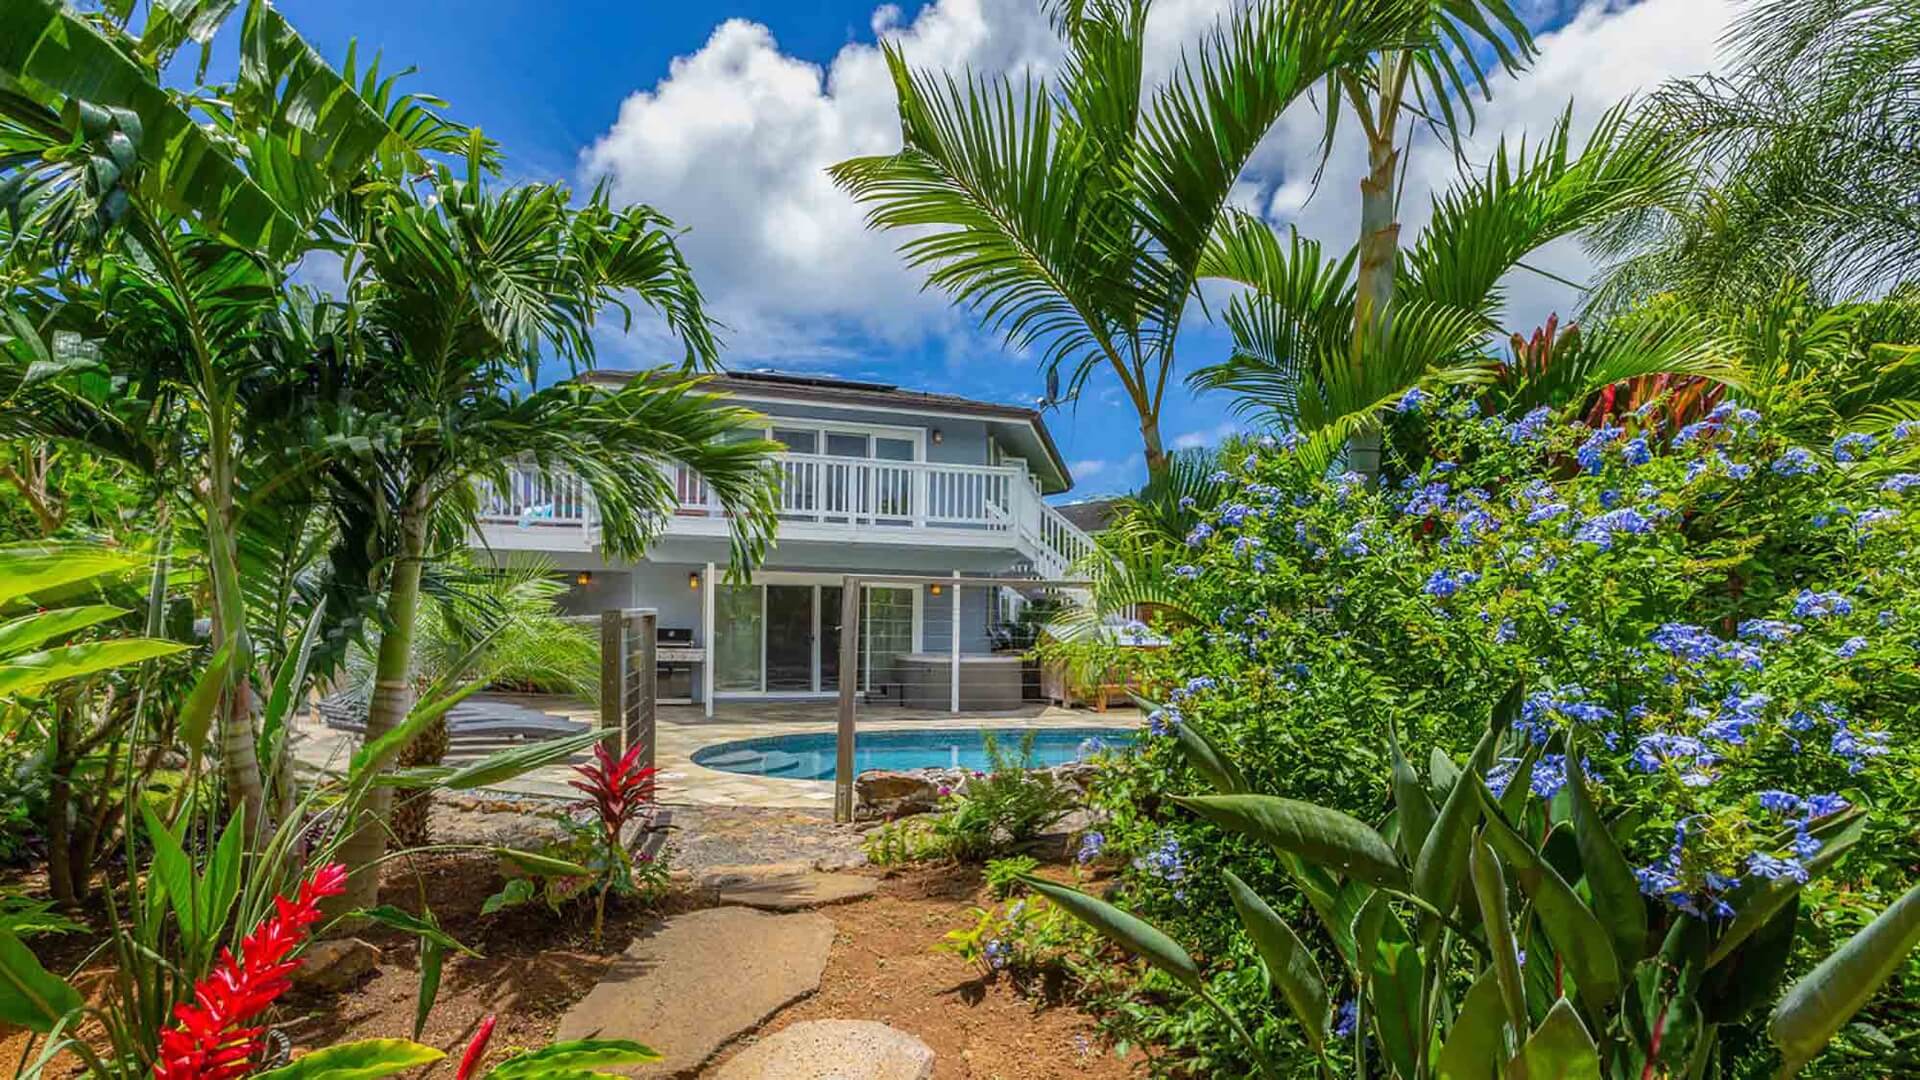 The exterior and pool deck of The Oasis at Princeville, a vacation home rental on Kauai's North Shore